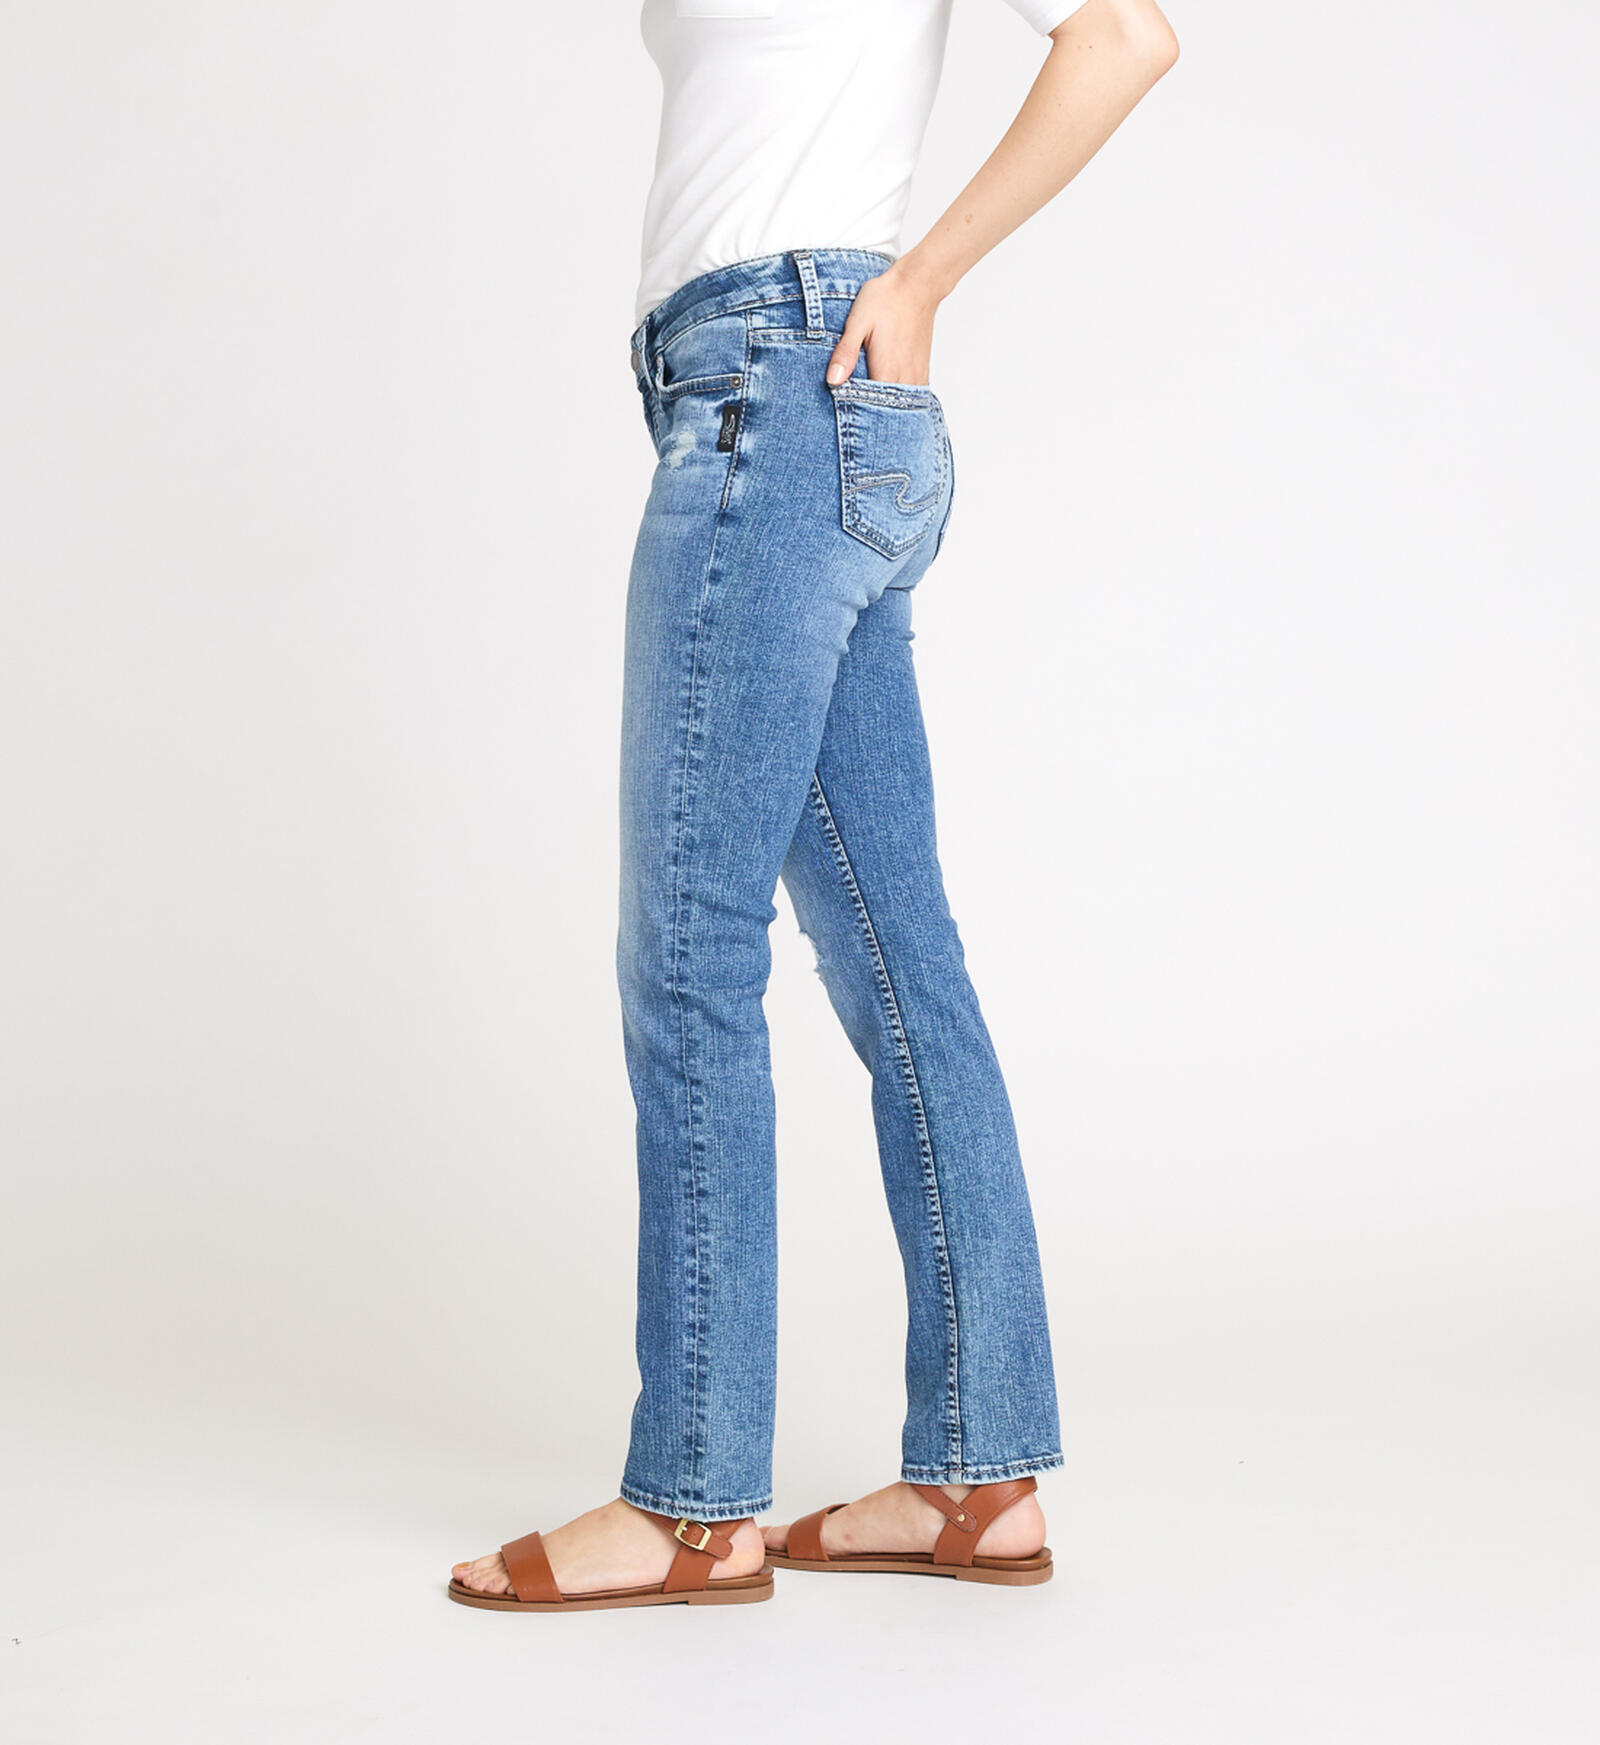 Buy Elyse Mid Rise Straight Leg Jeans for USD 70.00